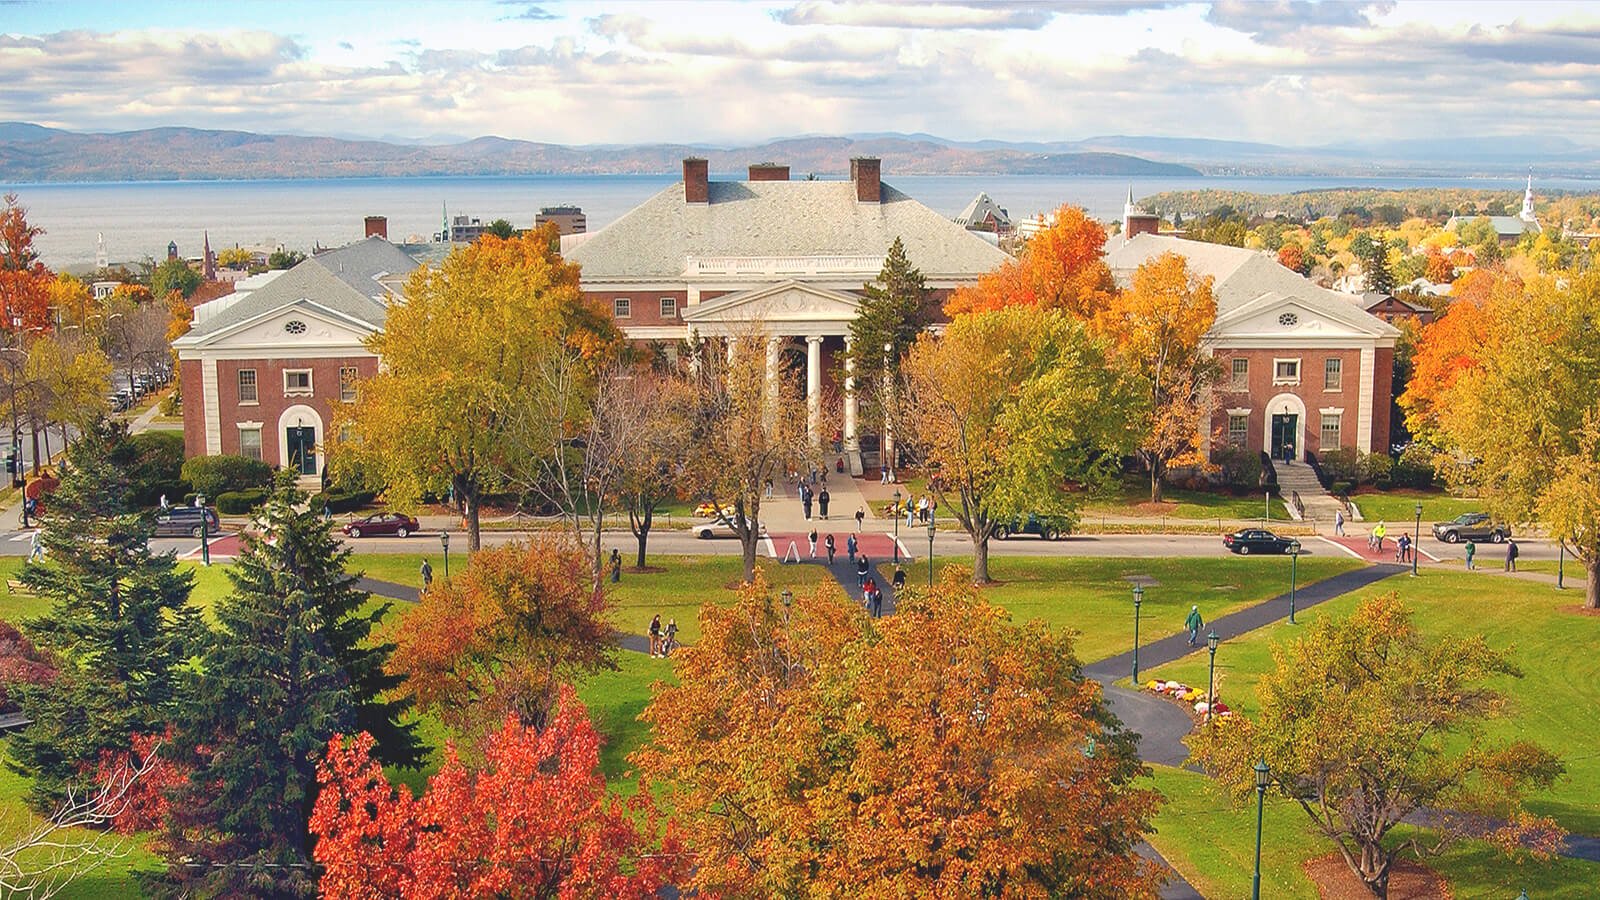 University of Vermont in the fall